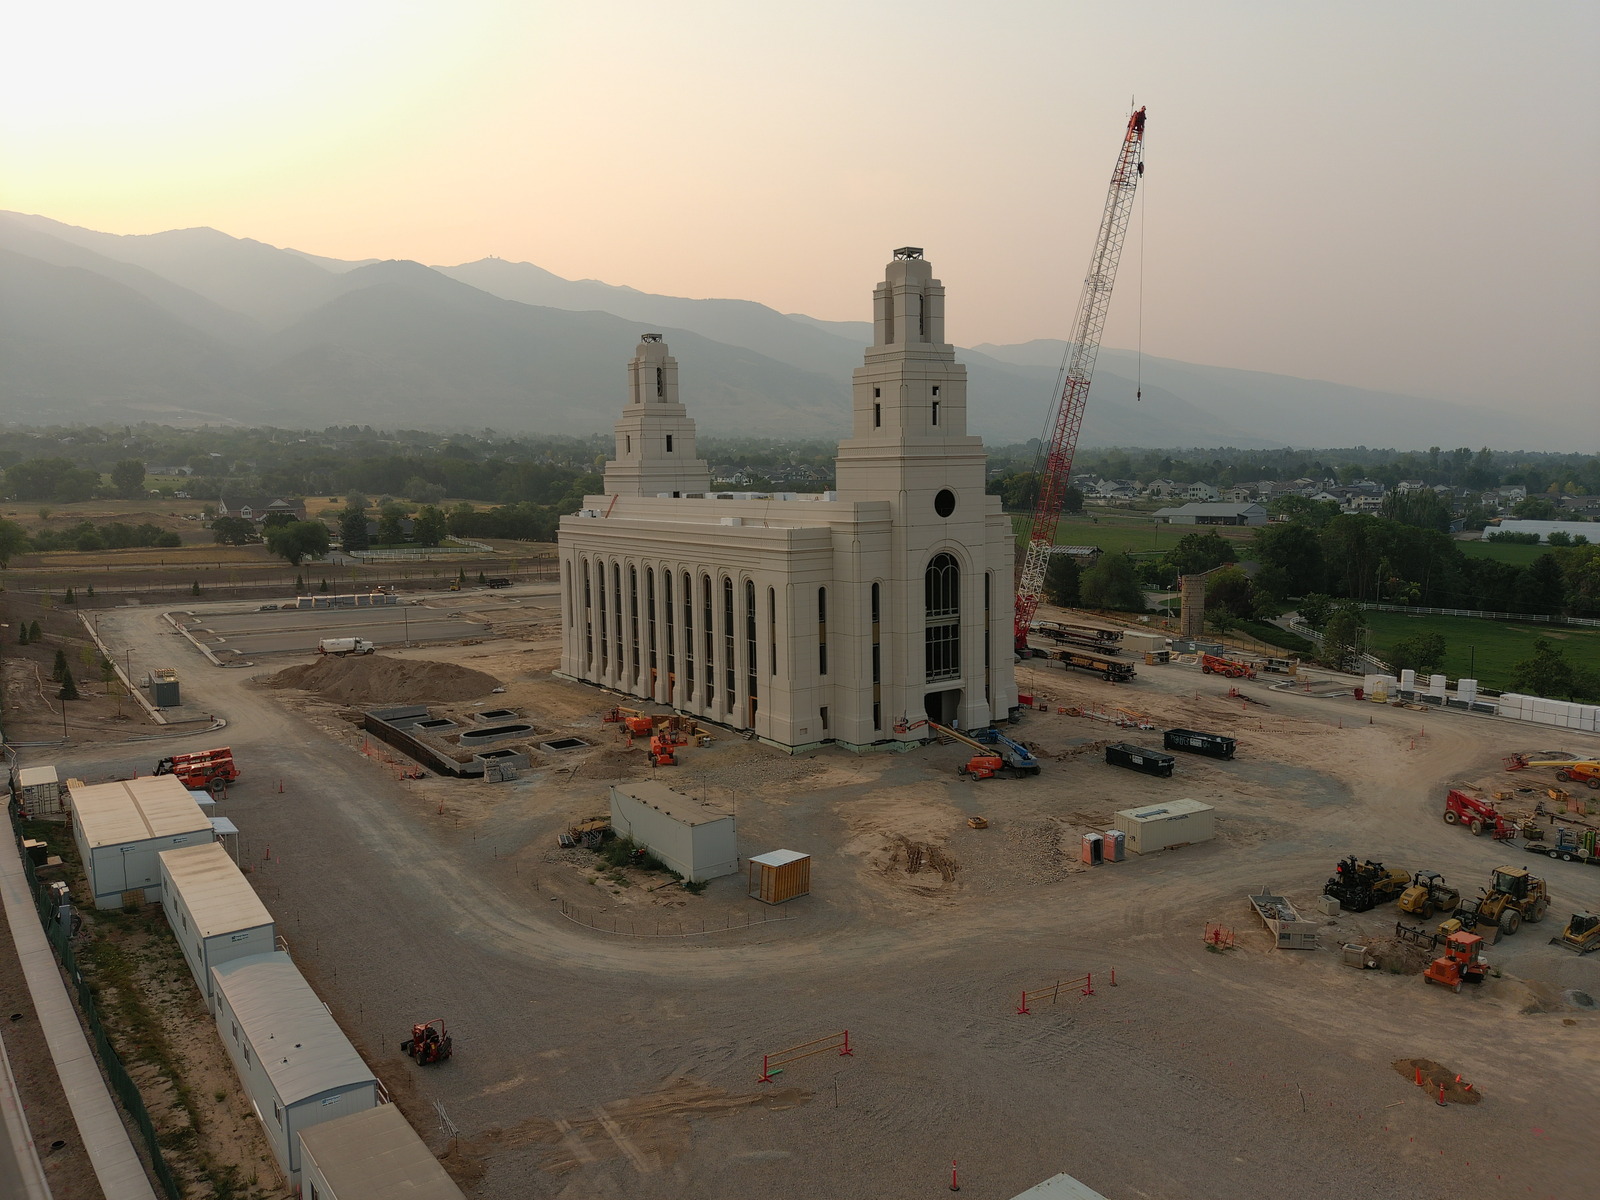 Layton Utah Temple Photograph Gallery | ChurchofJesusChristTemples.org